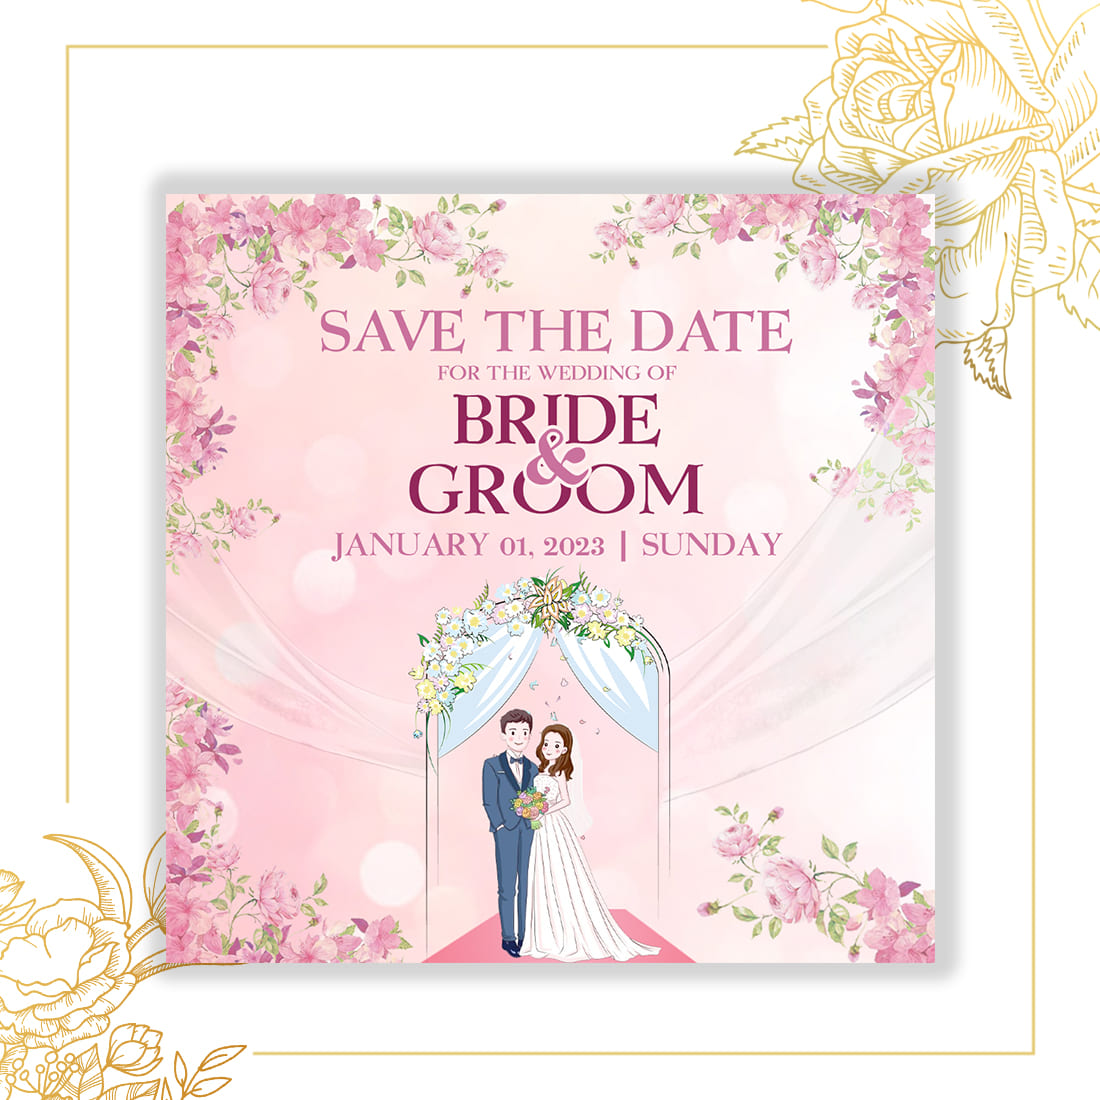 Wedding Invitation Template With Caricature Cover.